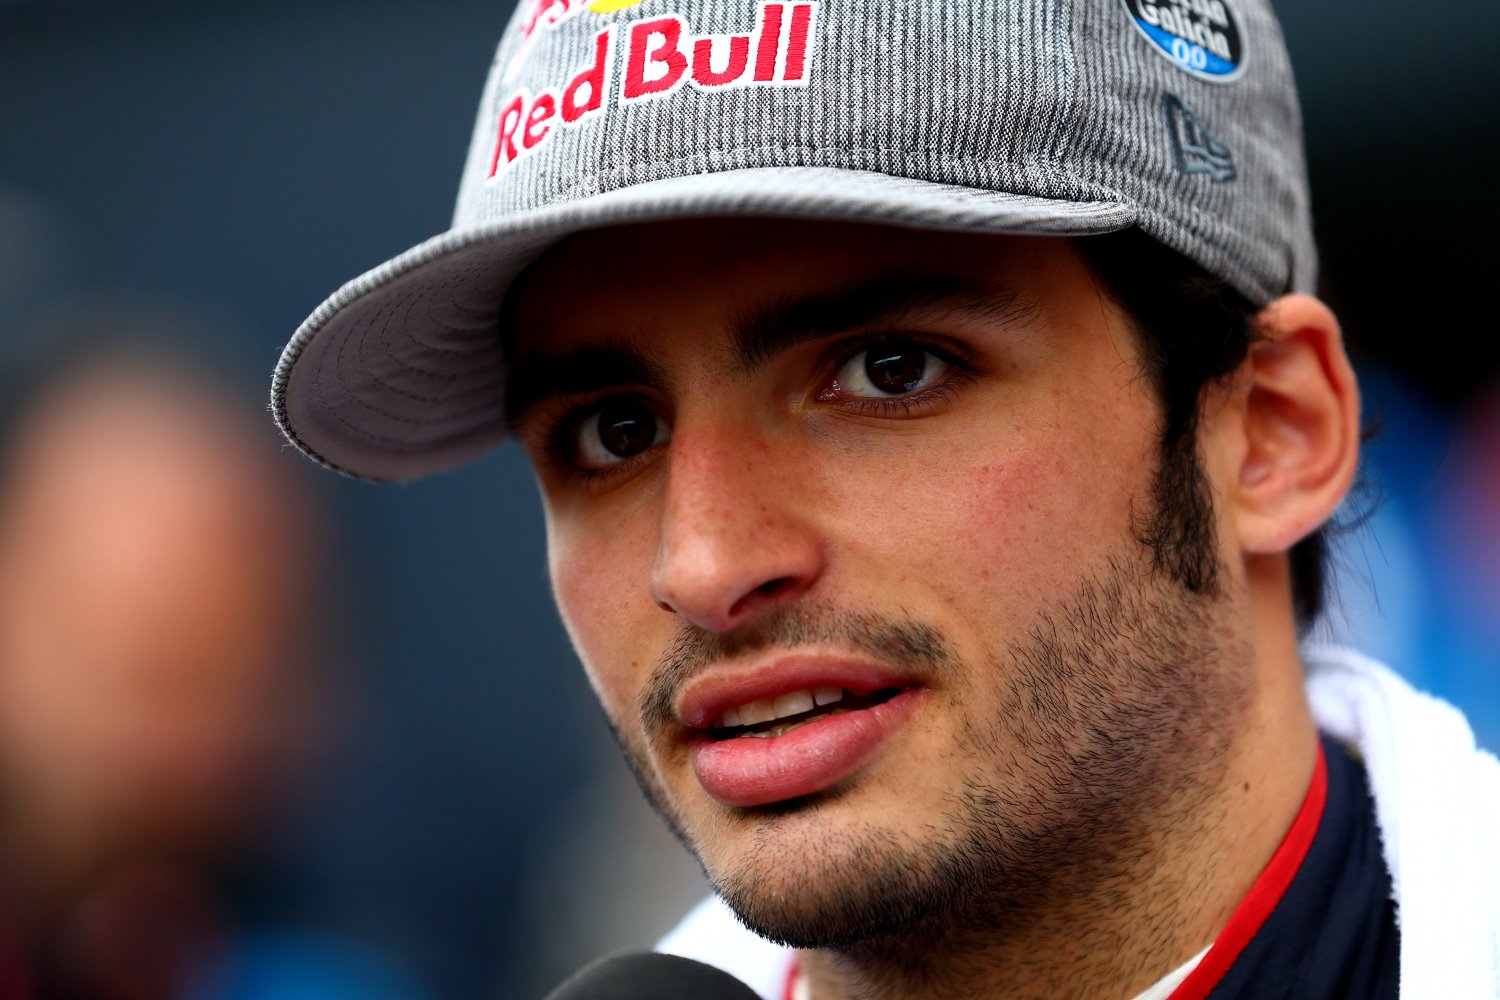 Sainz Jr. gets shafted by Red Bull again